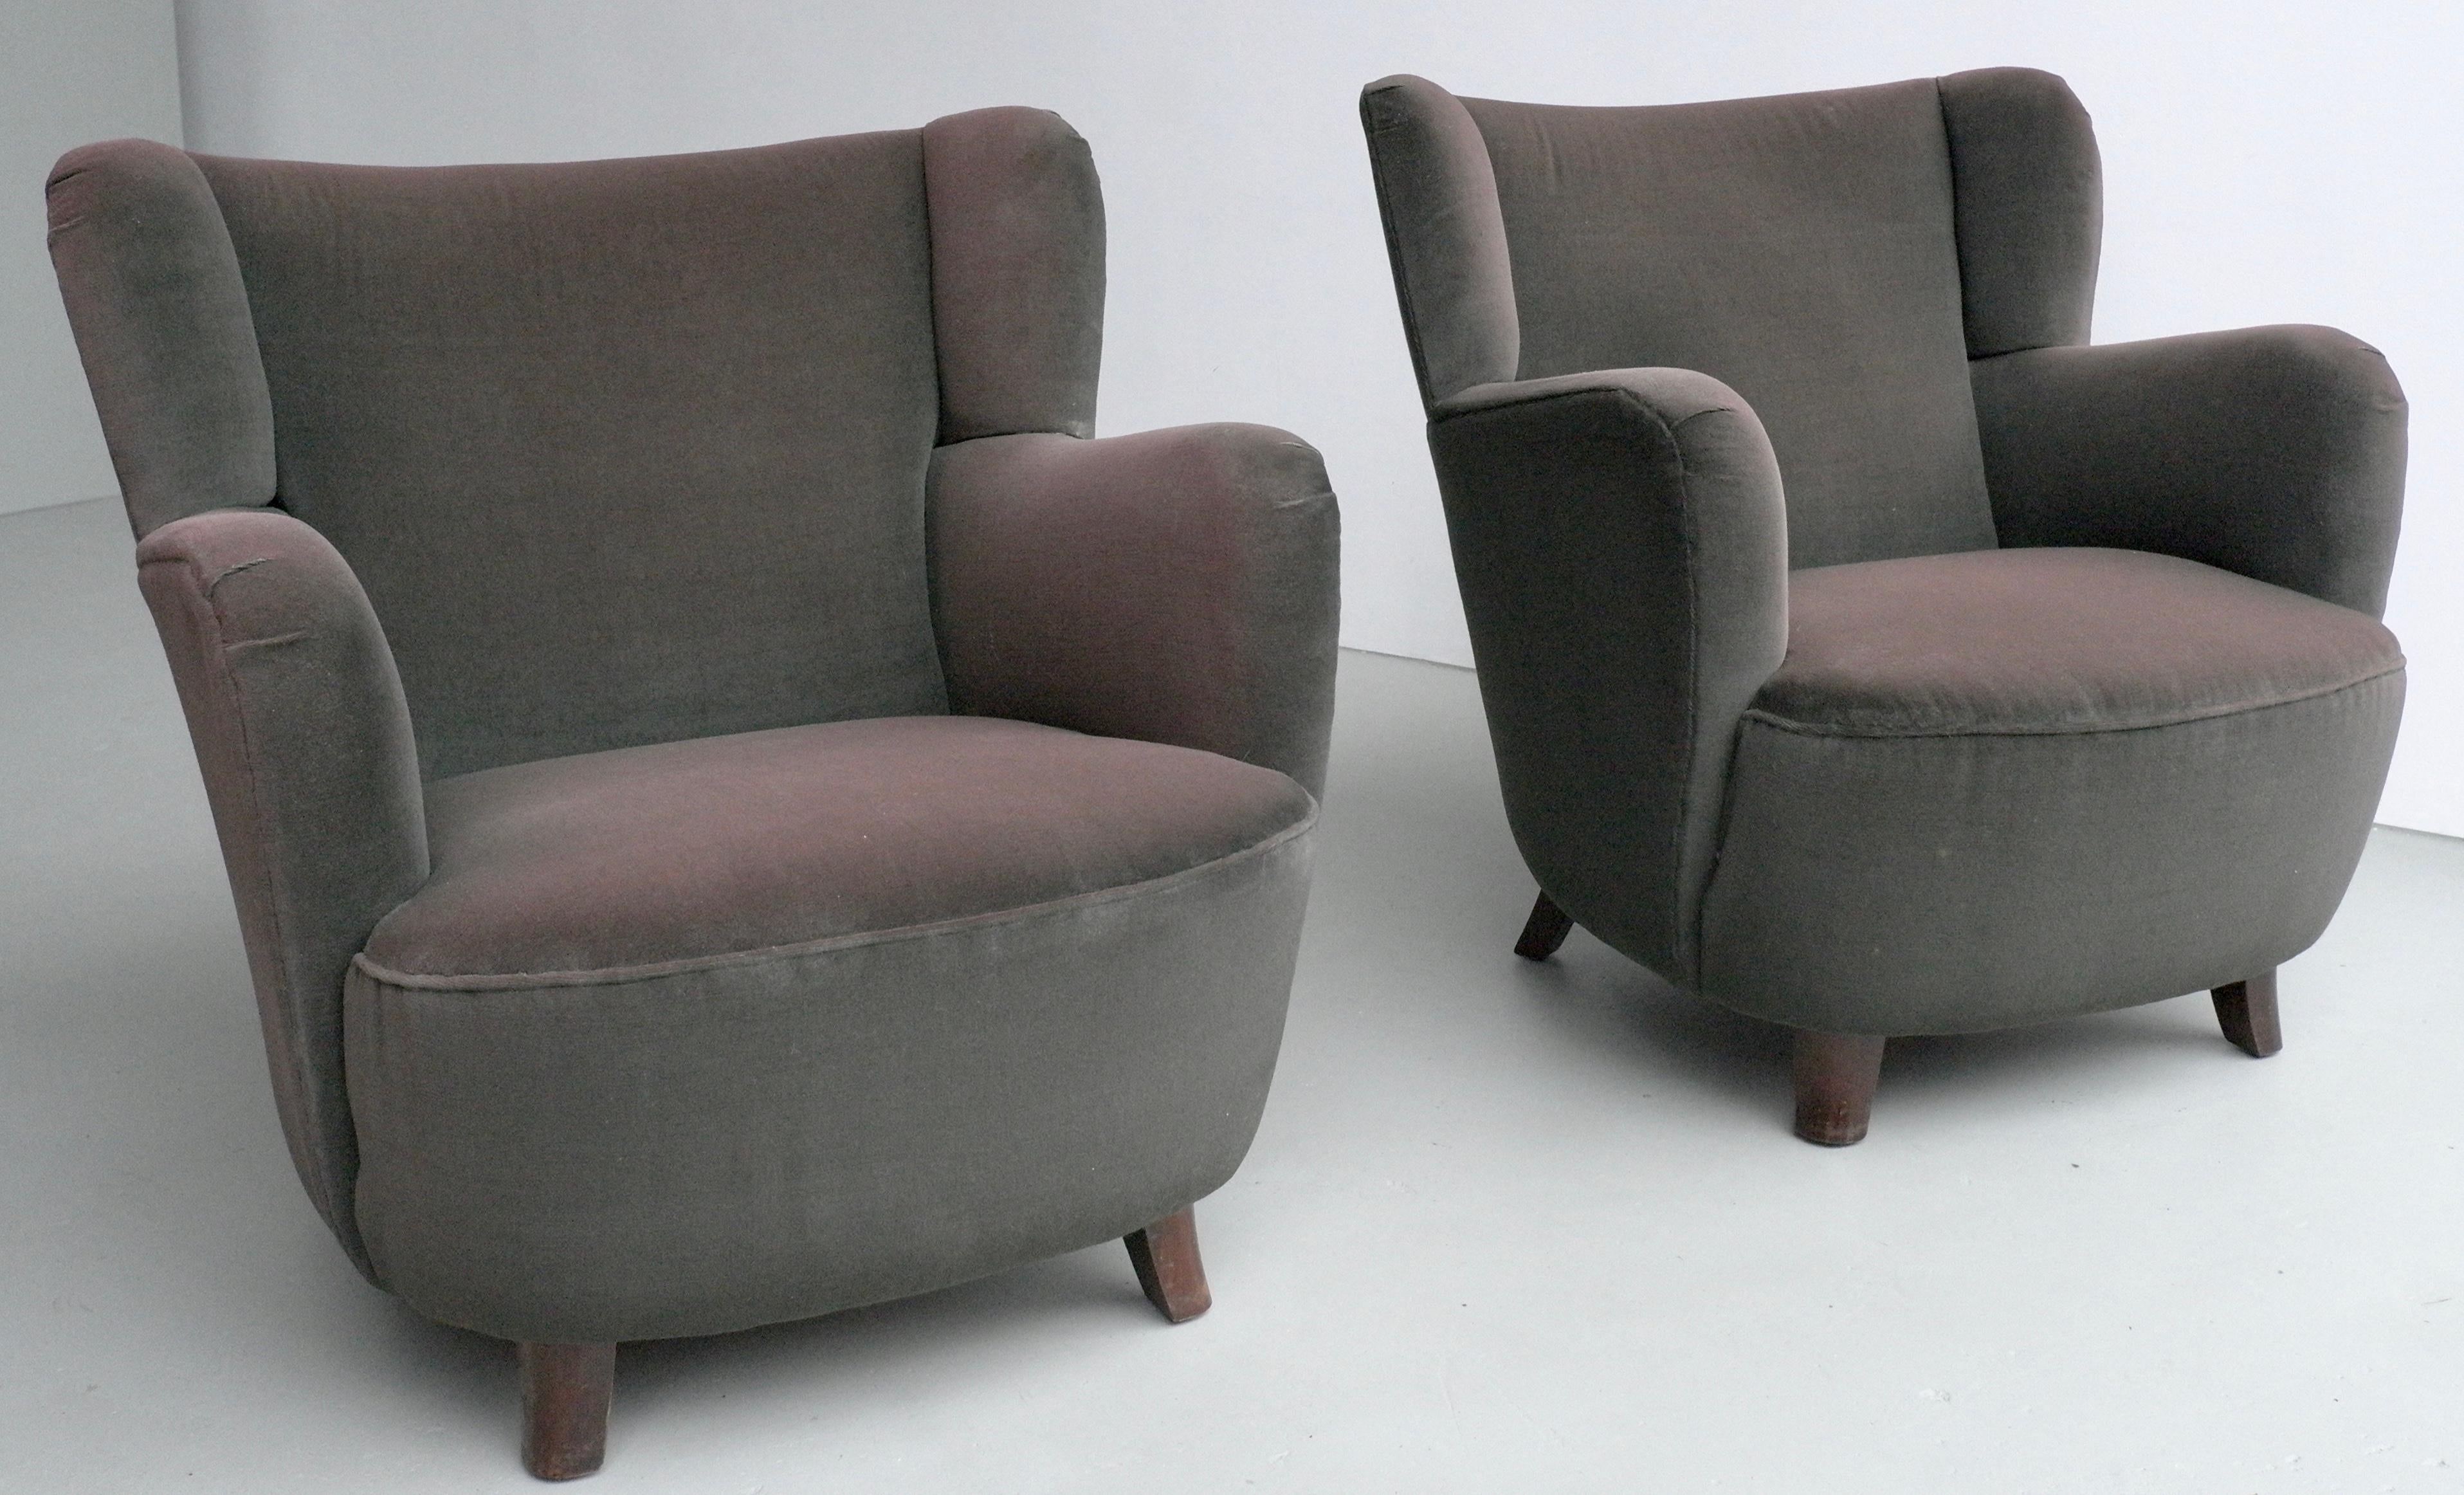 Pair of Mid-Century Modern Danish Lounge Chairs in Brown Eggplant Glow Velvet For Sale 3